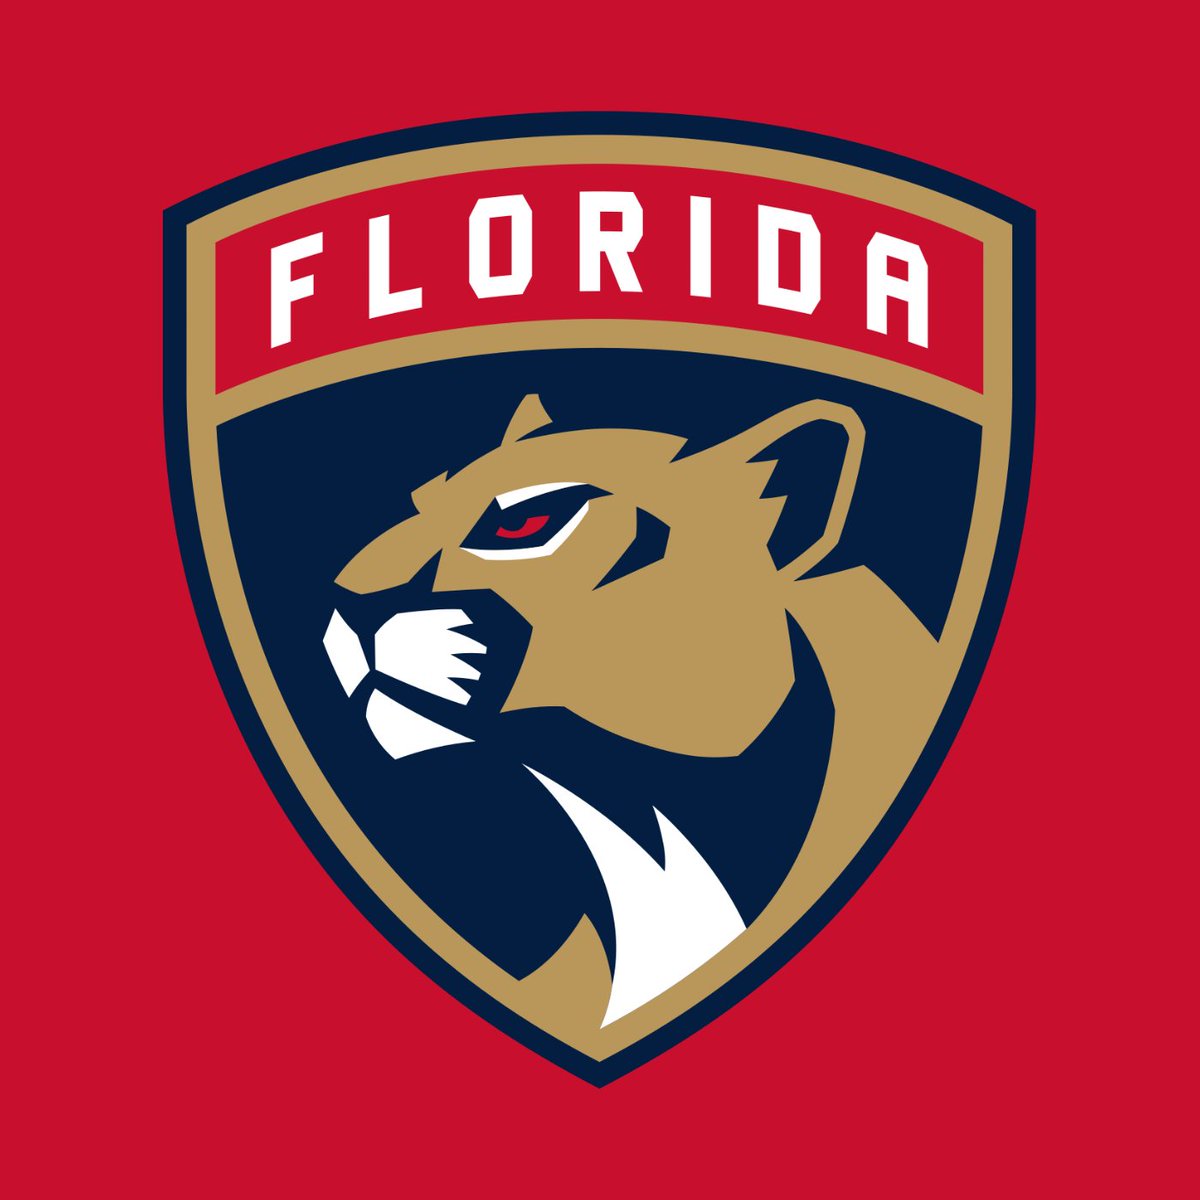 With the 130th overall selection in the NHL Draft, the Florida Panthers are proud to select: Han Solo. https://t.co/3GB4odIiRm